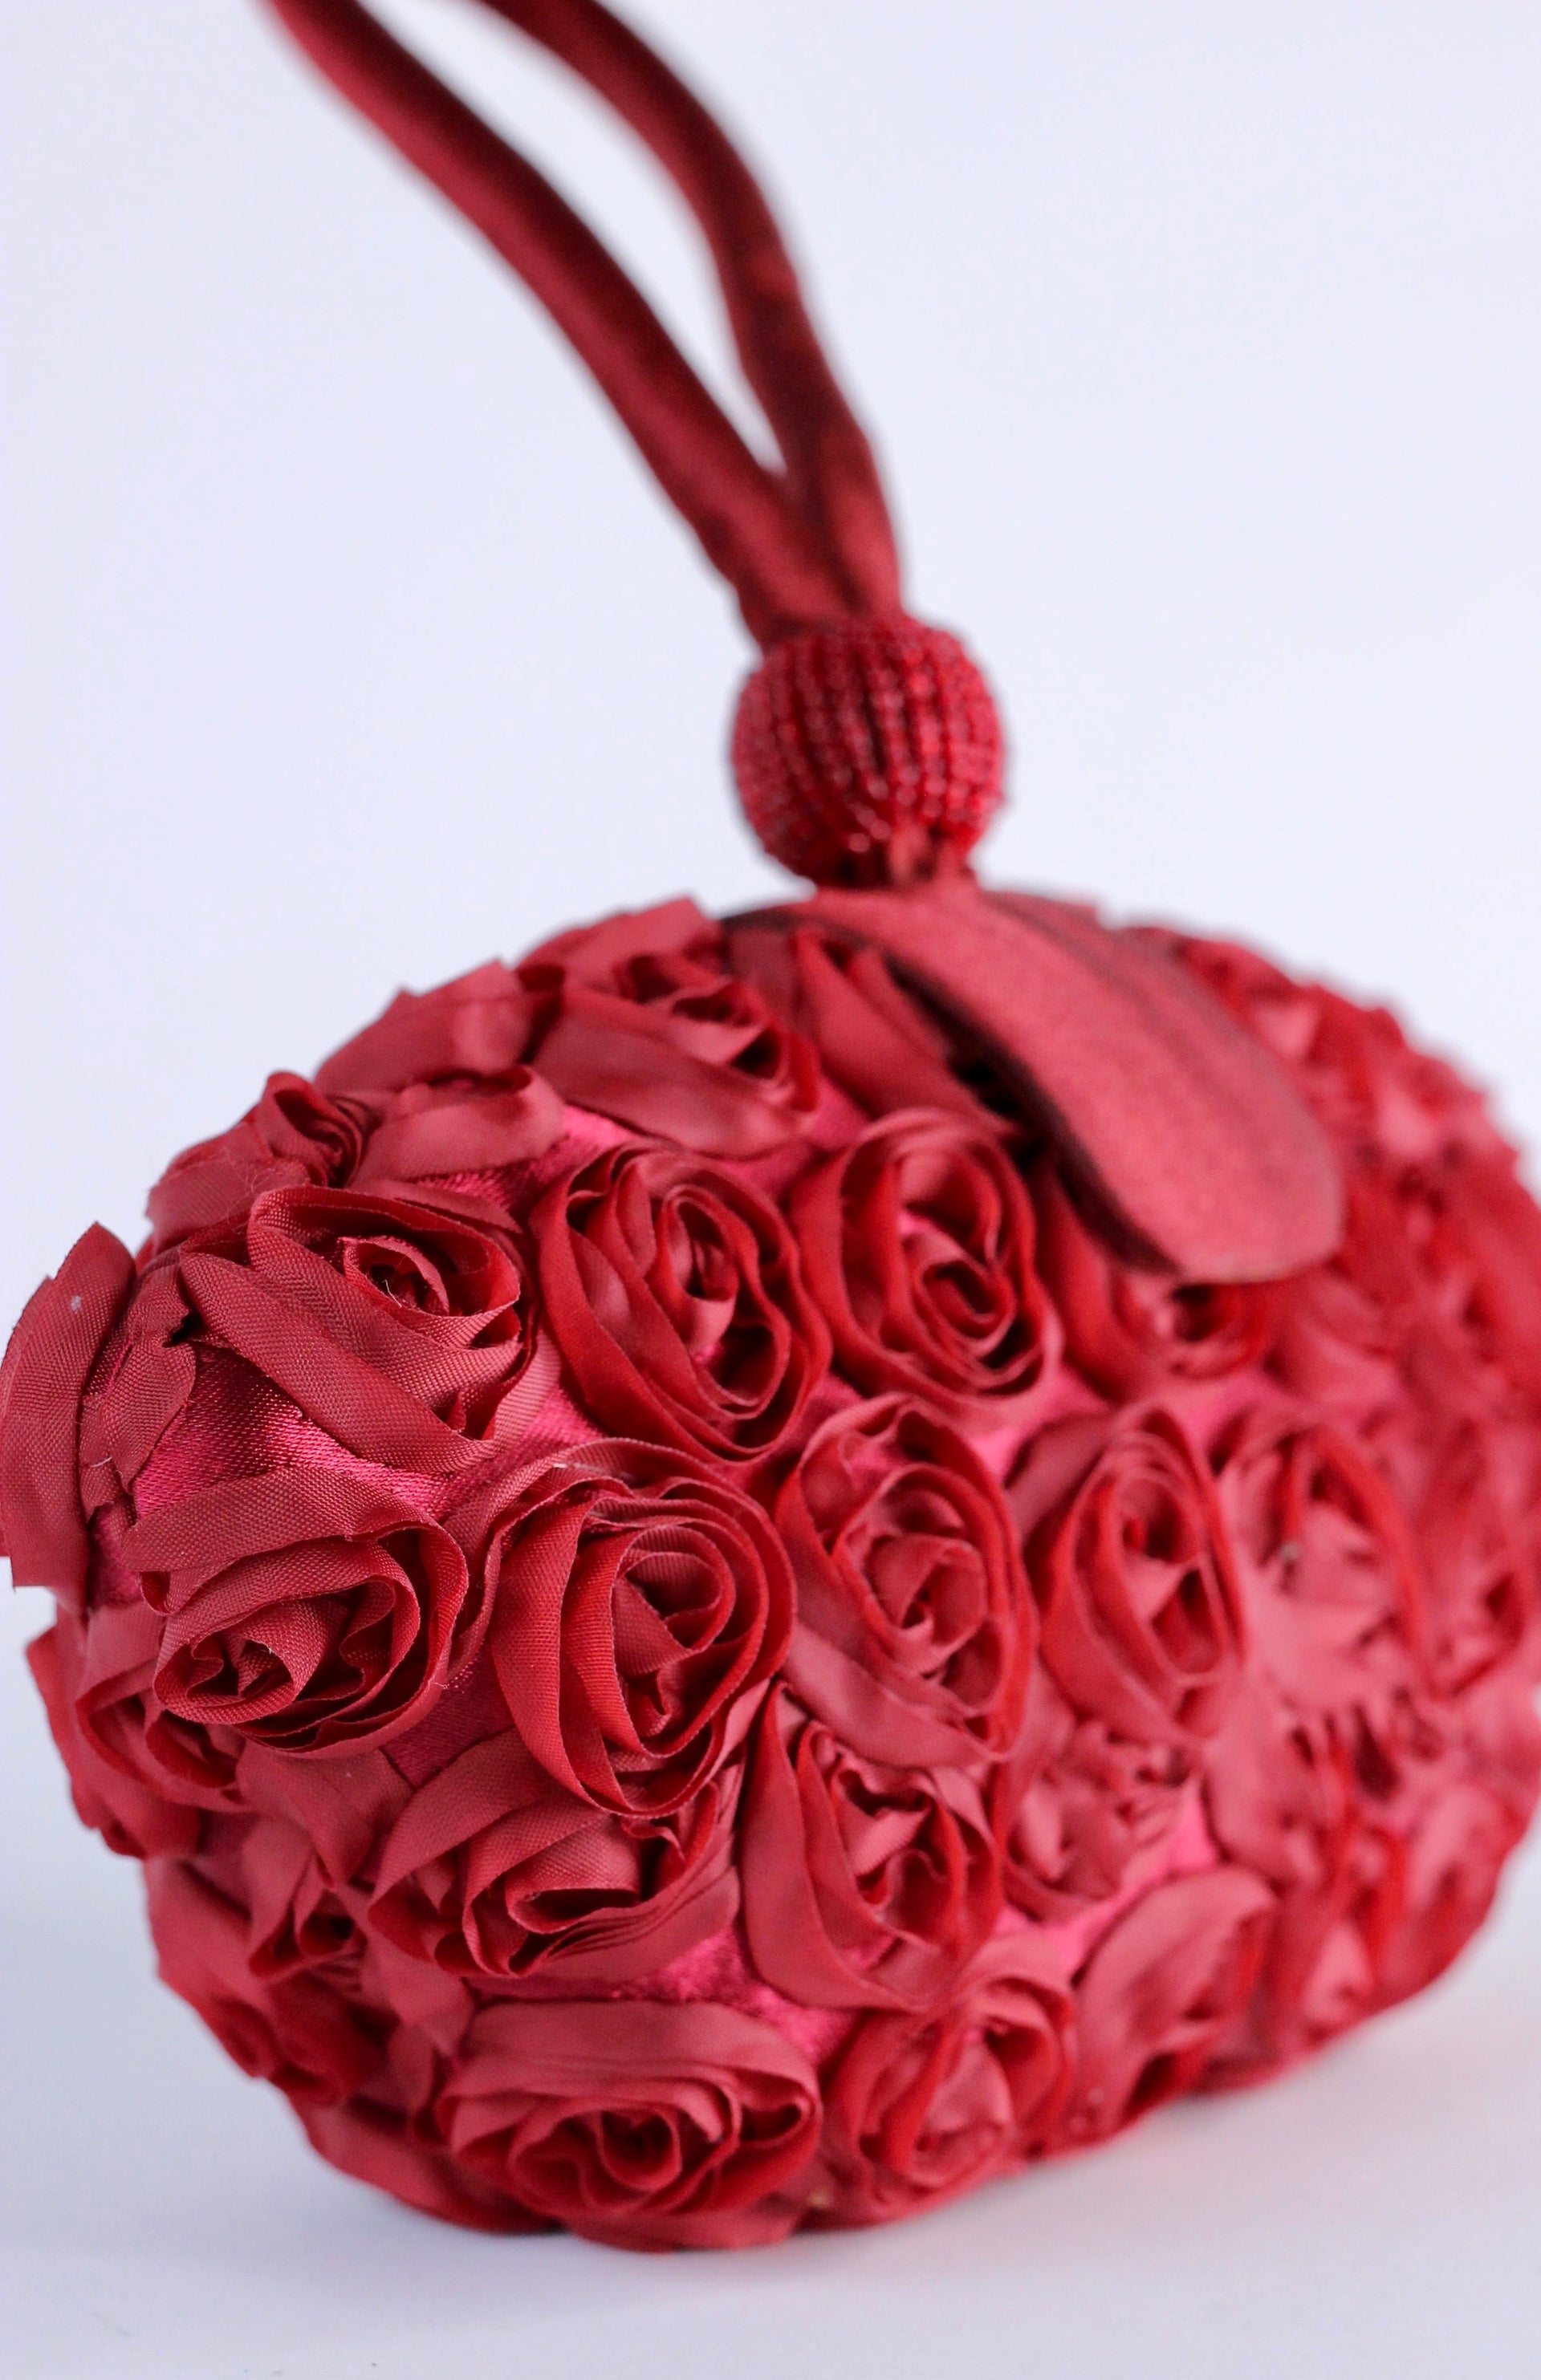 Vintage Red Satin Clutch Bag with 3D Roses and Beads